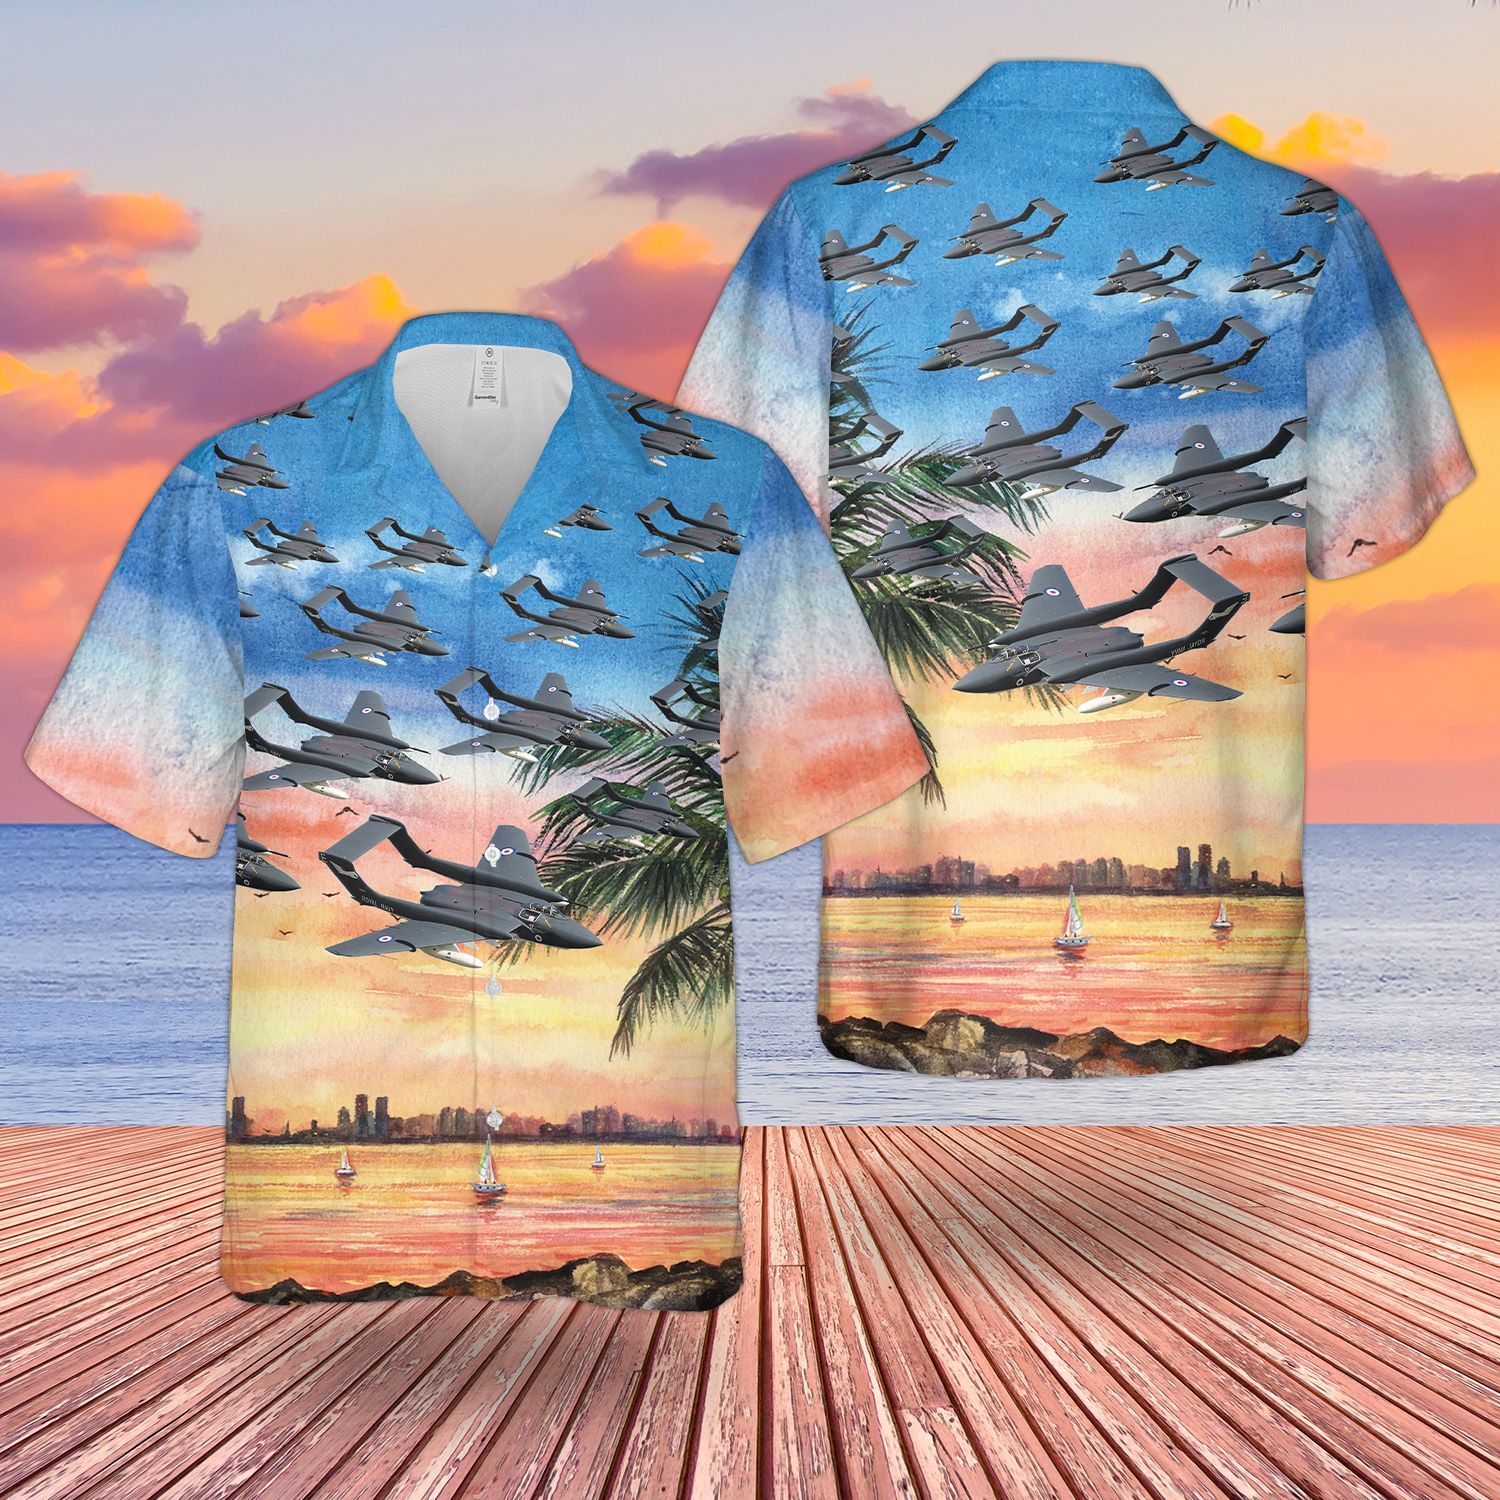 Click Below To Buy A Aloha Shirt That Fits Comfortably Word3